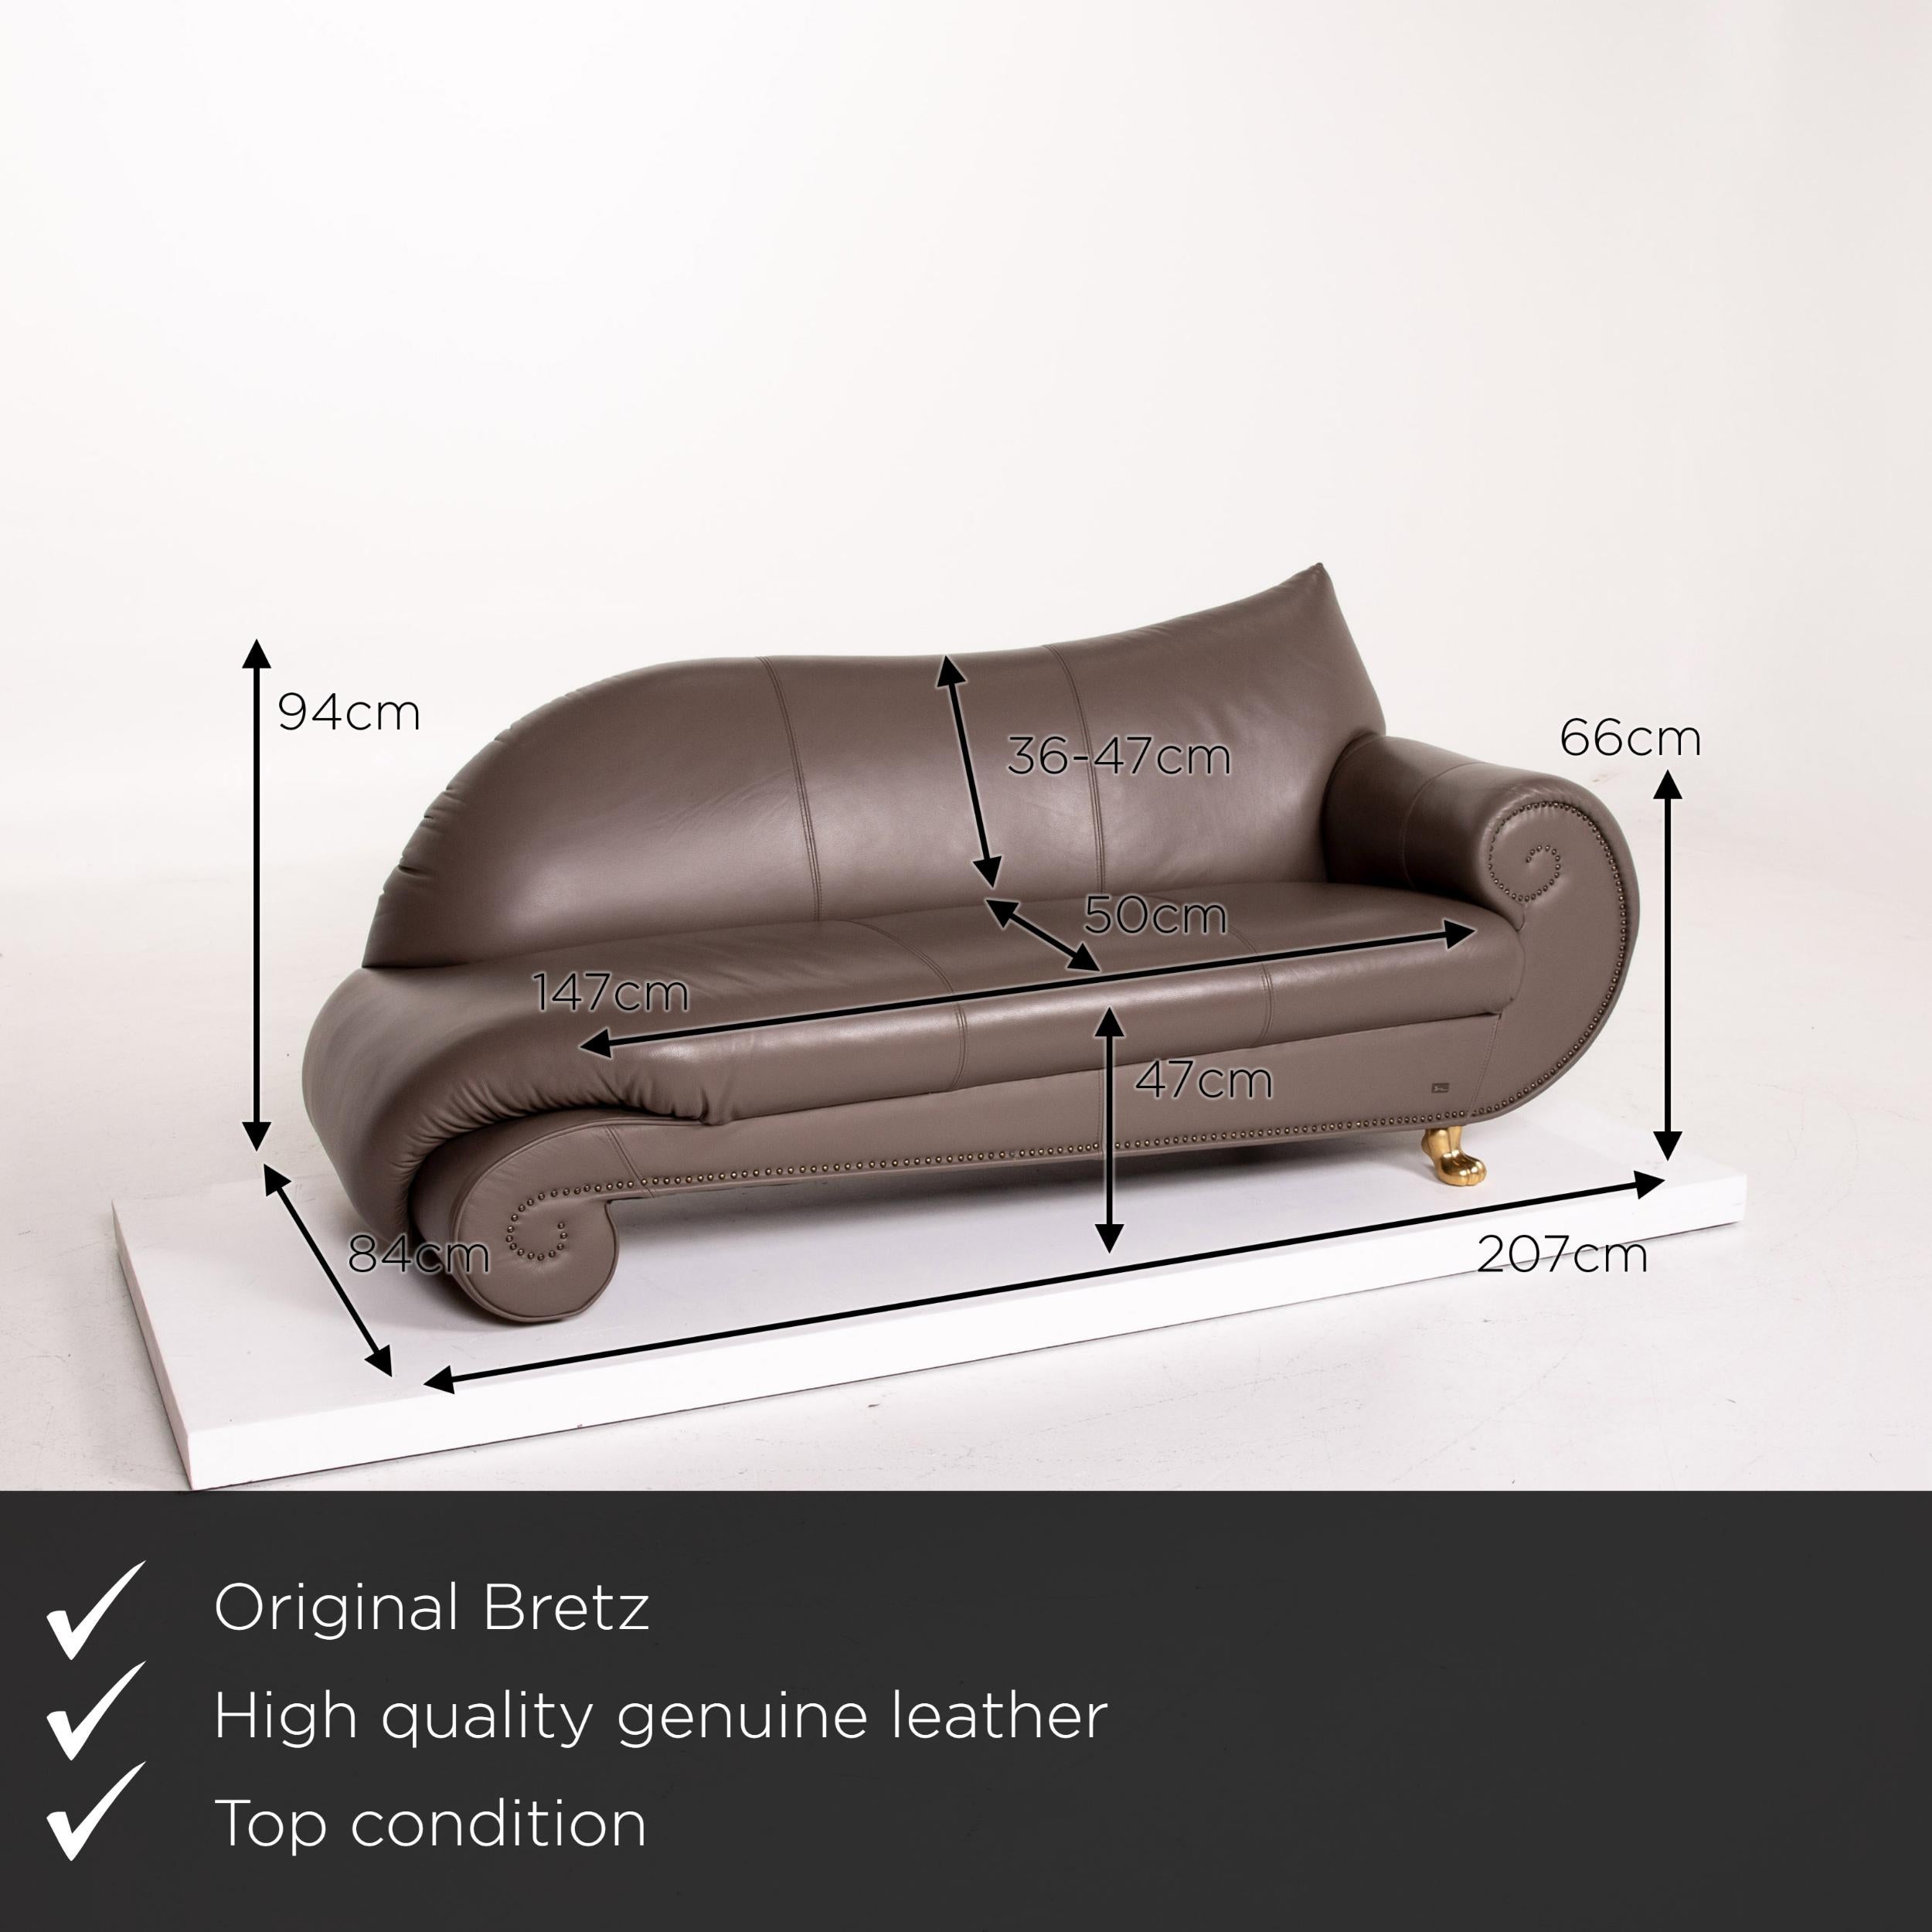 We present to you a Bretz Gaudi leather armchair gray brown brown three-seat couch gold-plated.
 

 Product measurements in centimeters:
 

Depth 84
Width 207
Height 94
Seat height 47
Rest height 66
Seat depth 50
Seat width 147
Back